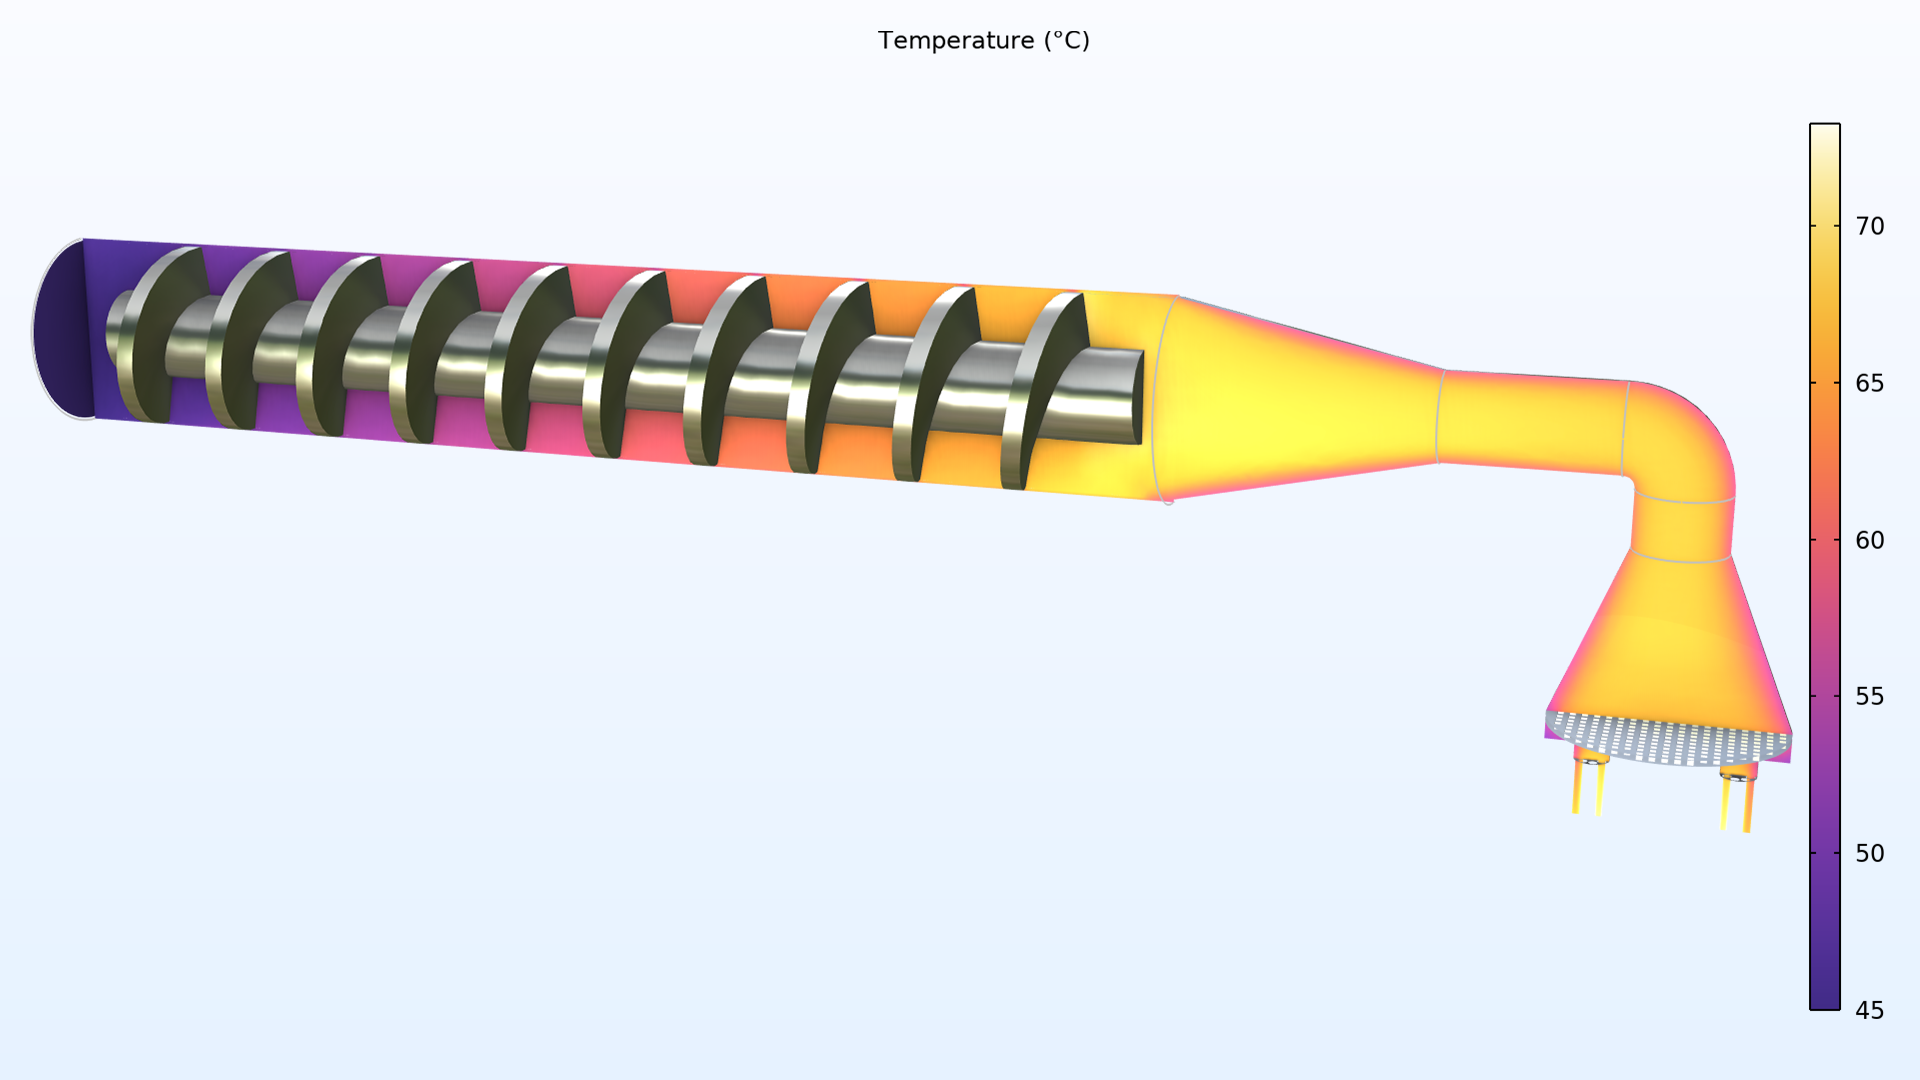 A pasta extruder model next to a temperature scale, with the left end of the model being dark purple; the middle being an ombre of pink, red, and orange; and the nozzle being yellow.